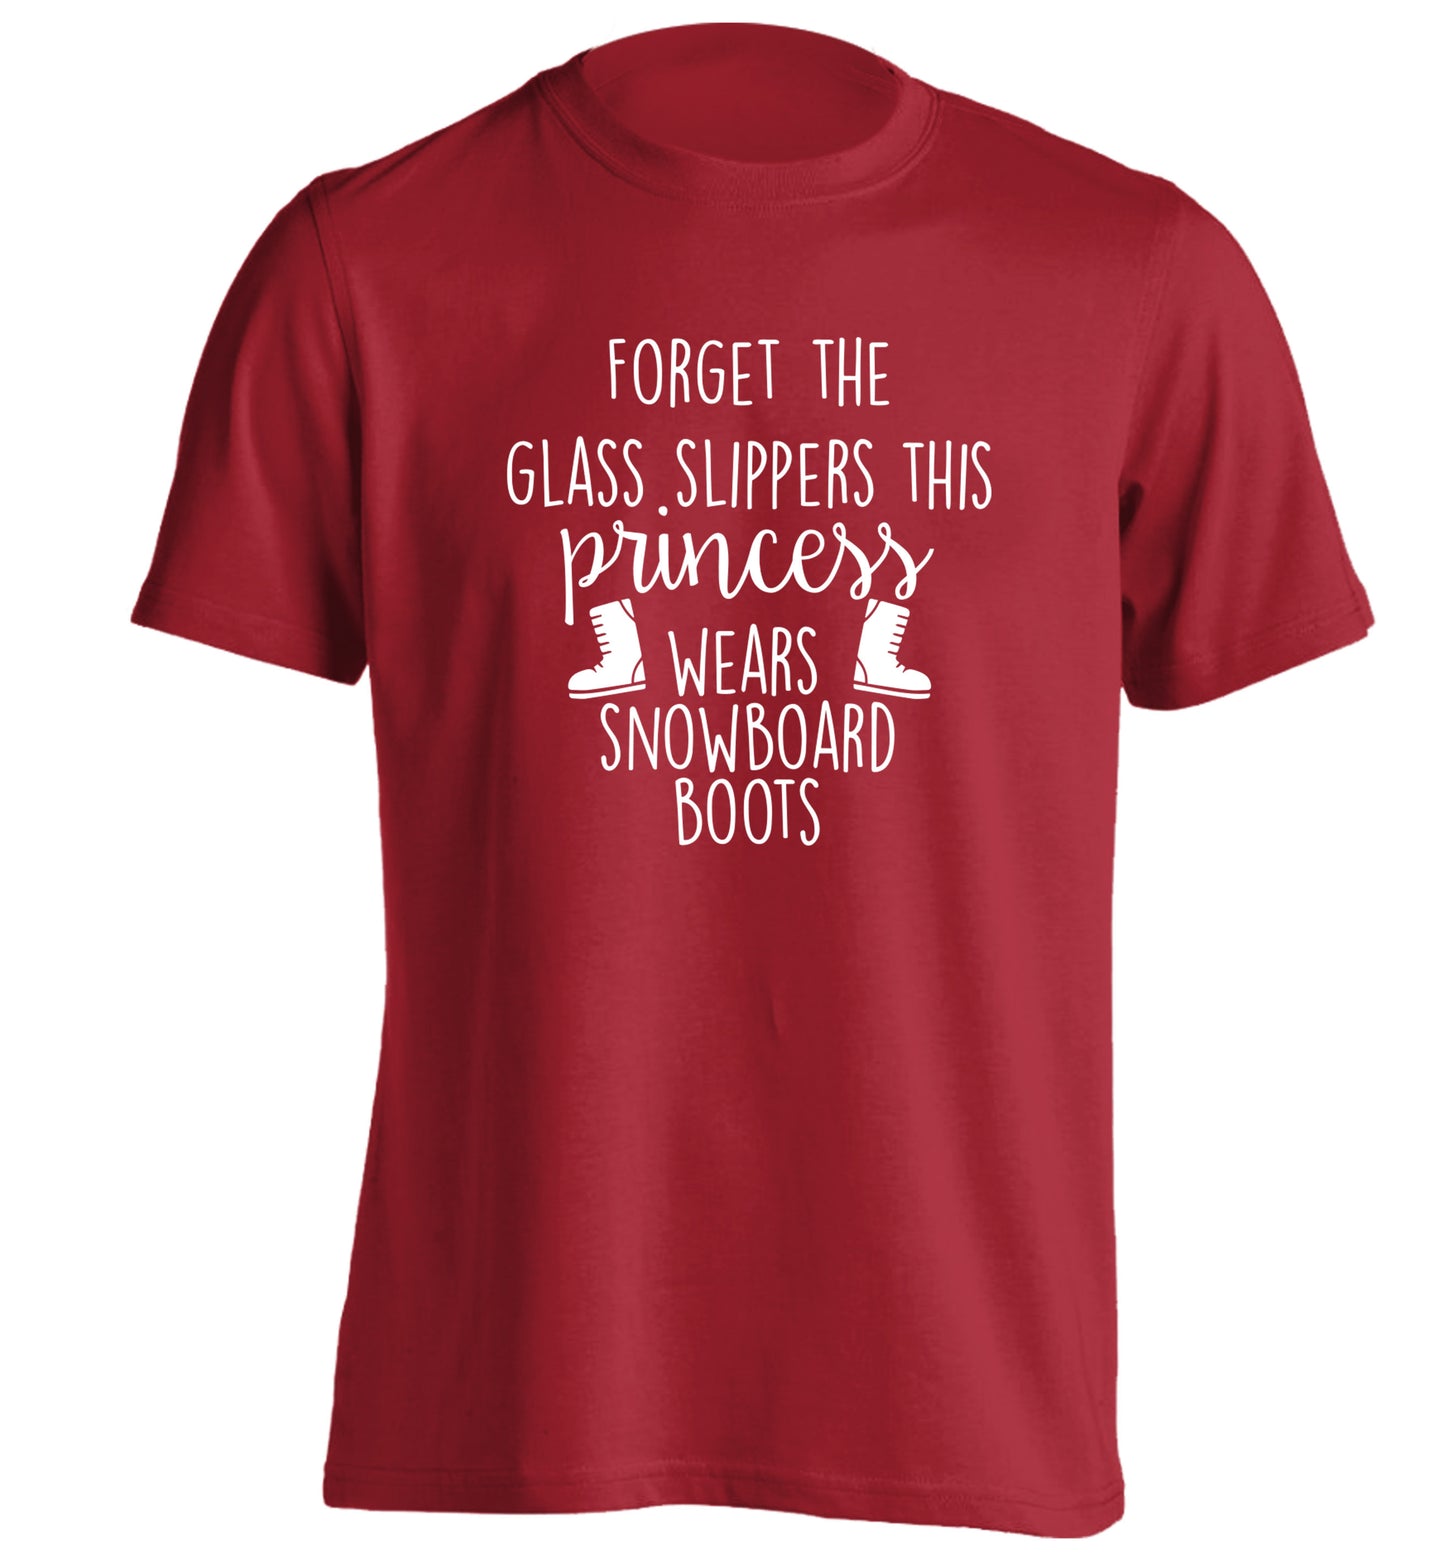 Forget the glass slippers this princess wears snowboard boots adults unisex red Tshirt 2XL